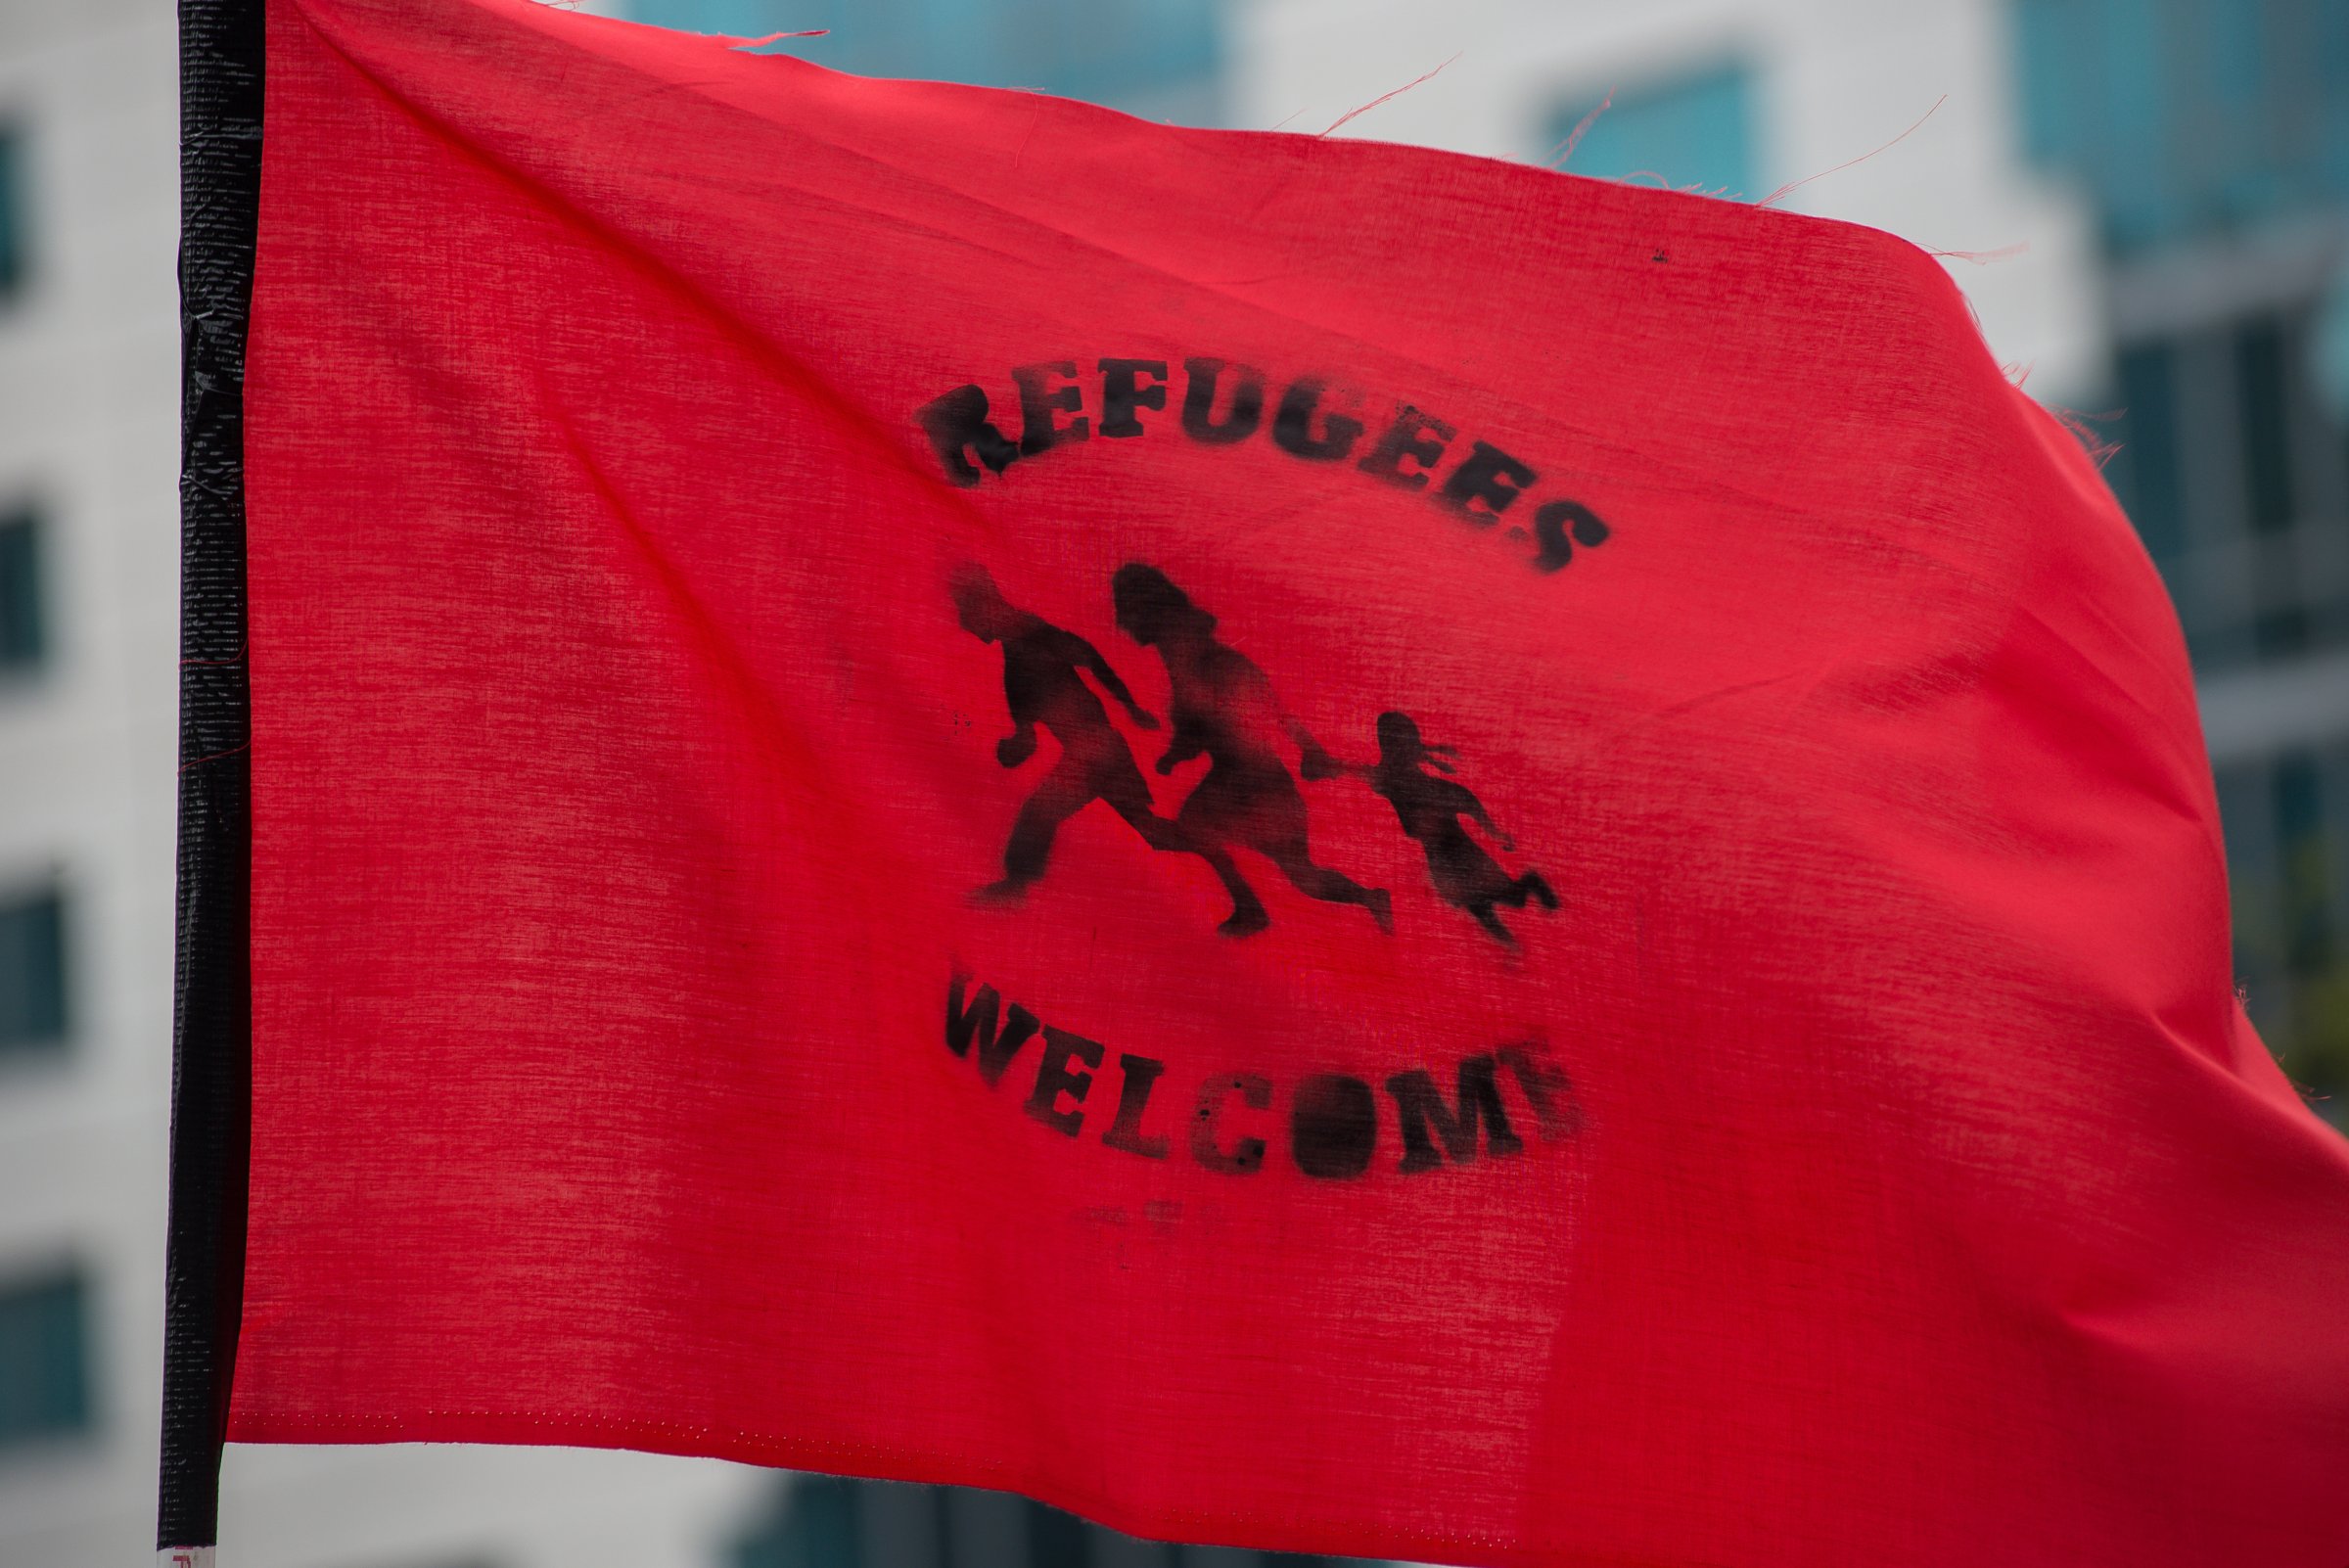 A demonstrator holds a flag declaring "Refugees Welcome." A